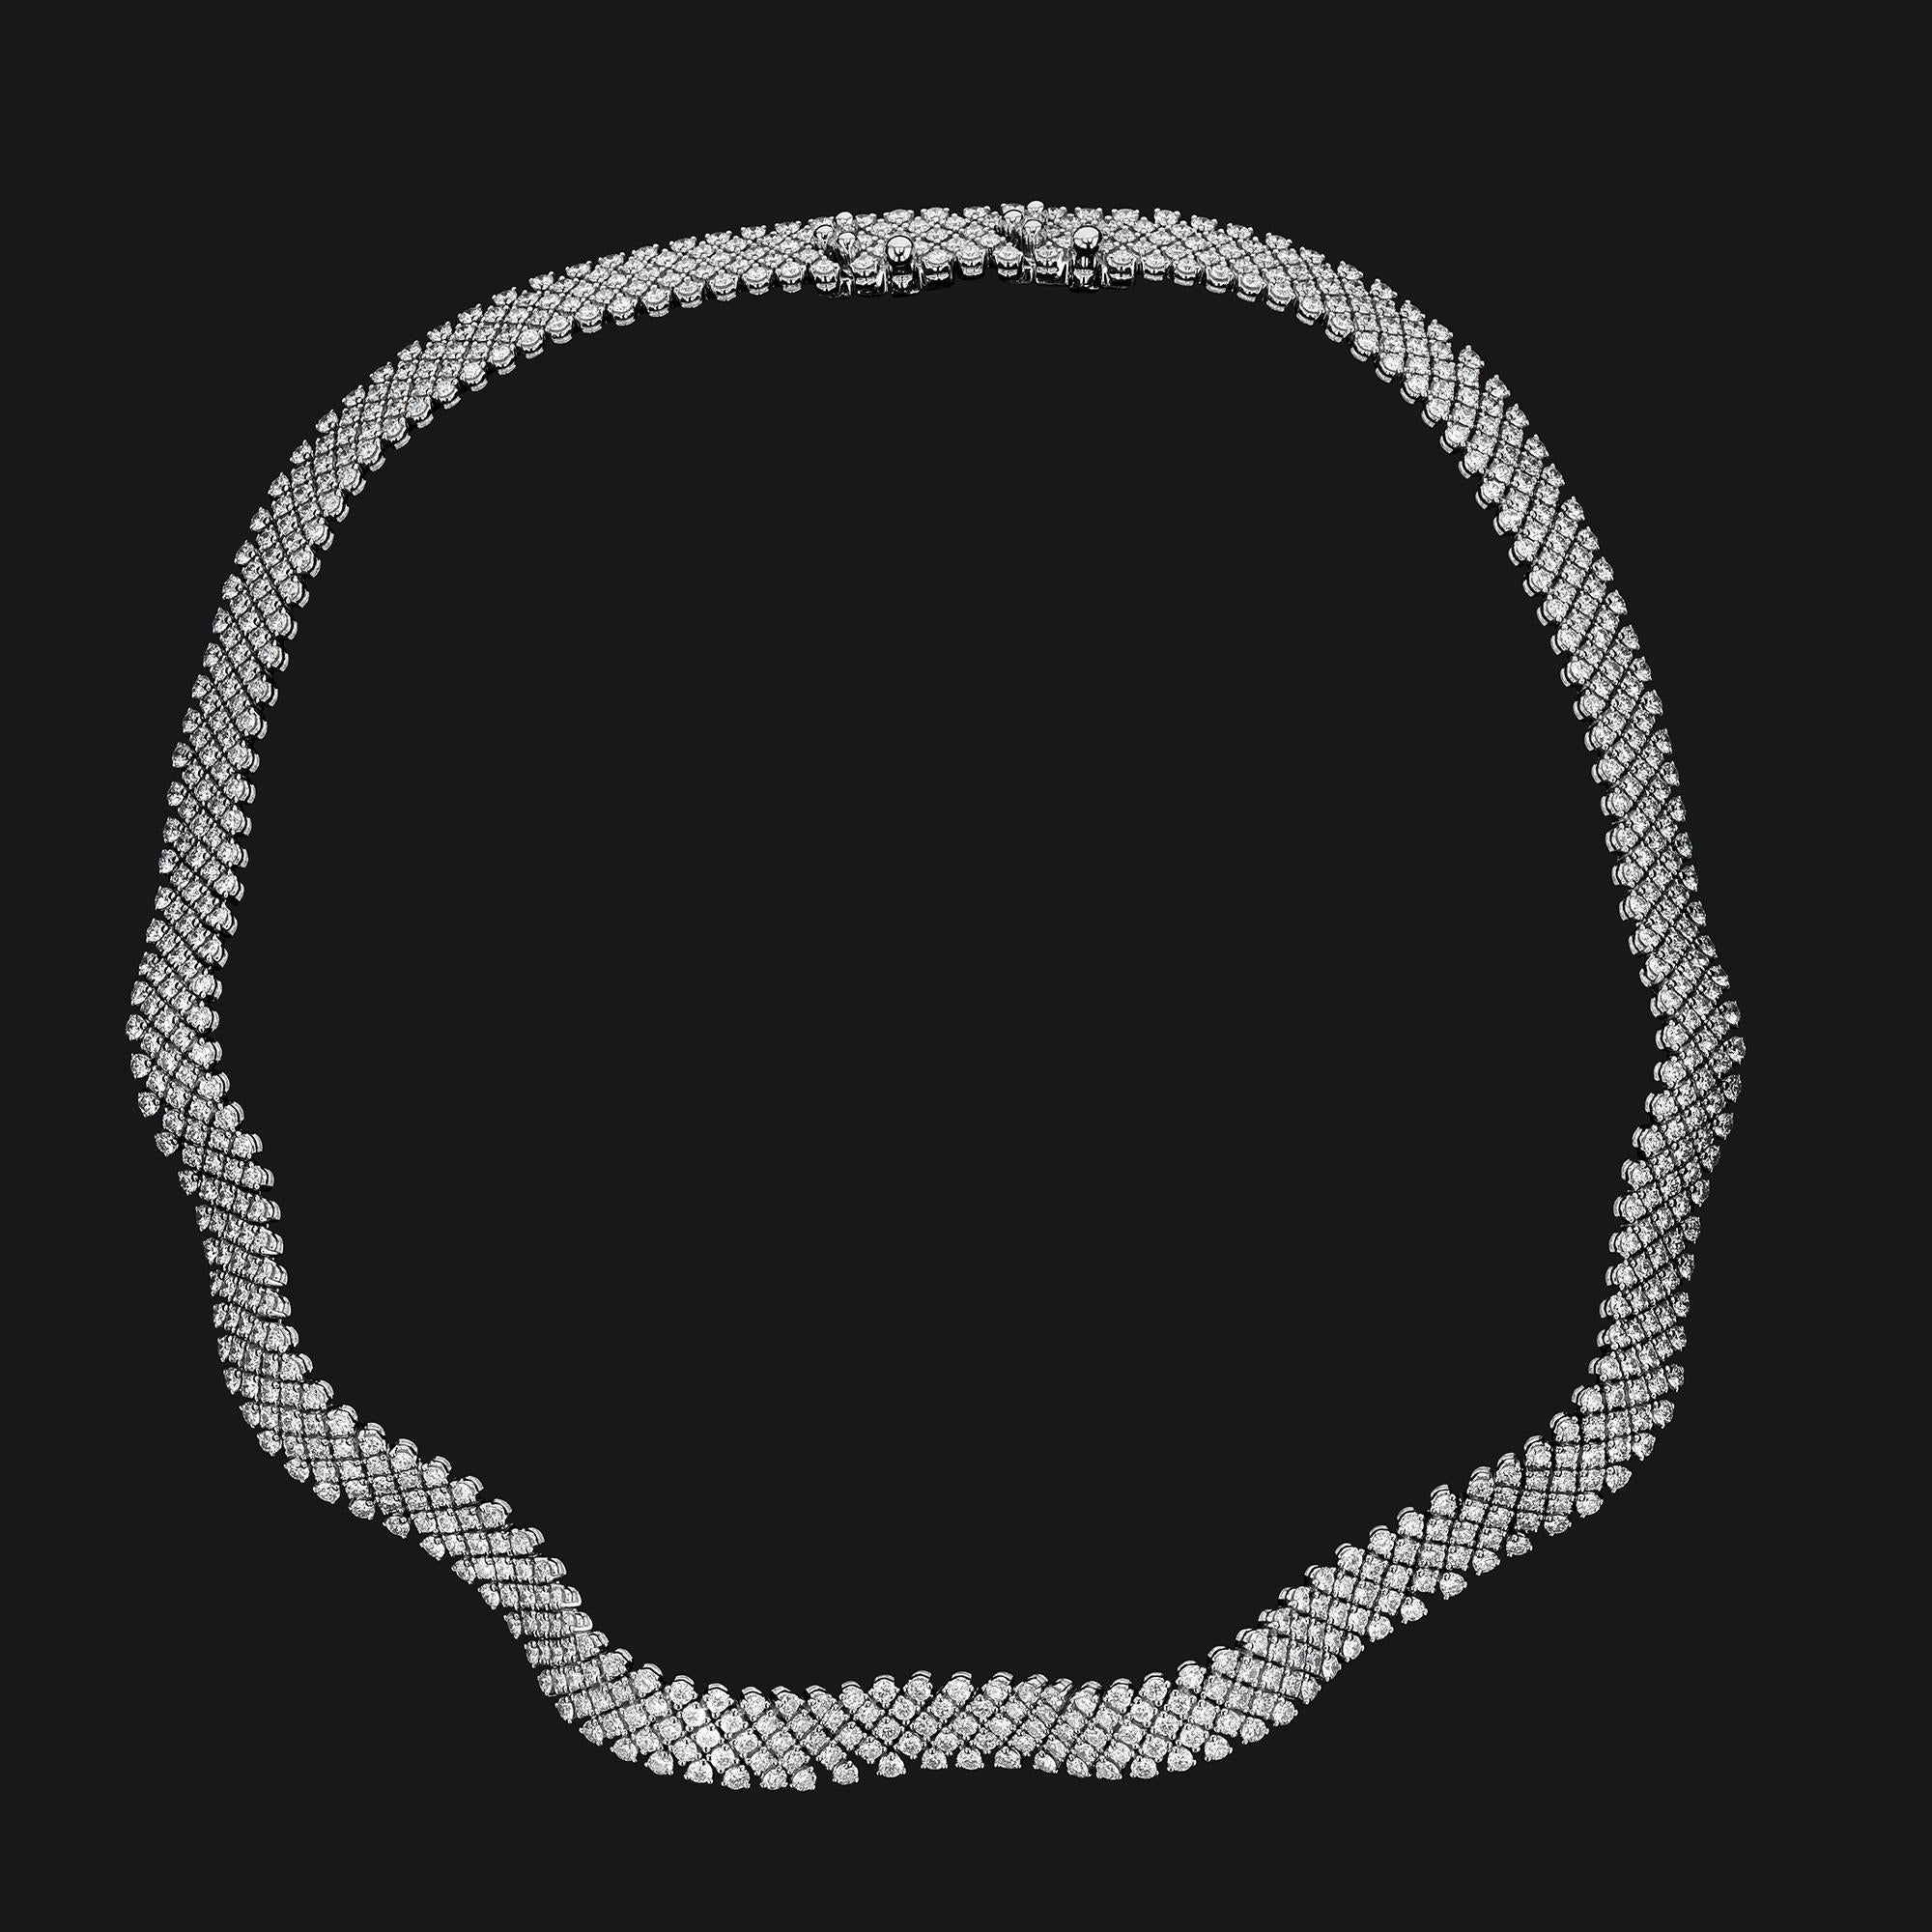 Vintage 18kt White Gold Diamond Ribbon necklace with 712 round full cut stones. They have a total carat weight of  17.80. The diamonds are G-H in color & VS in clarity. The diamonds are all prong set in 5 rows with a curved ribbon like pattern.